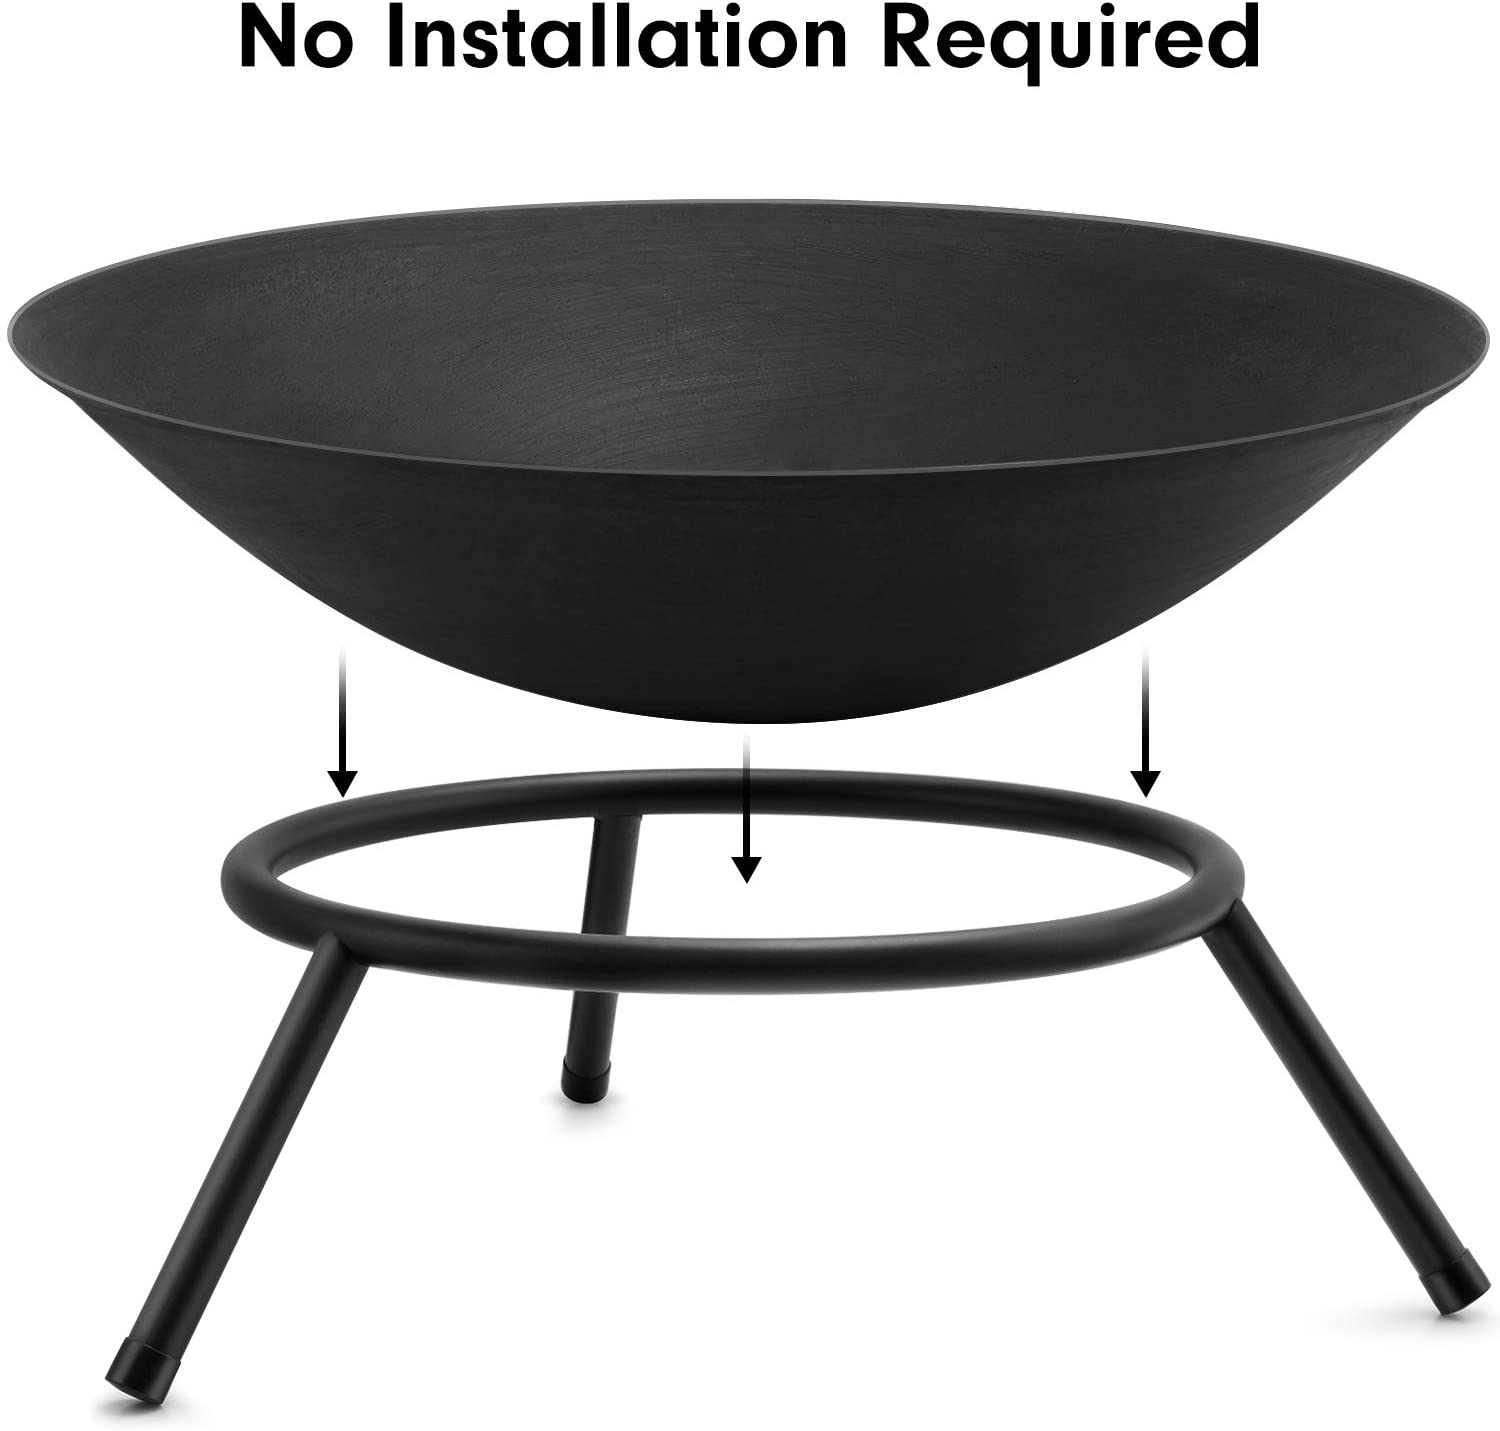 Fire Pit Outdoor Wood Burning 22.6in Cast Iron Firebowl Fireplace Heater Log Charcoal Burner Extra Deep Large Round Camping Outside Patio Backyard Deck Heavy Duty Metal Grate Black - image 3 of 8